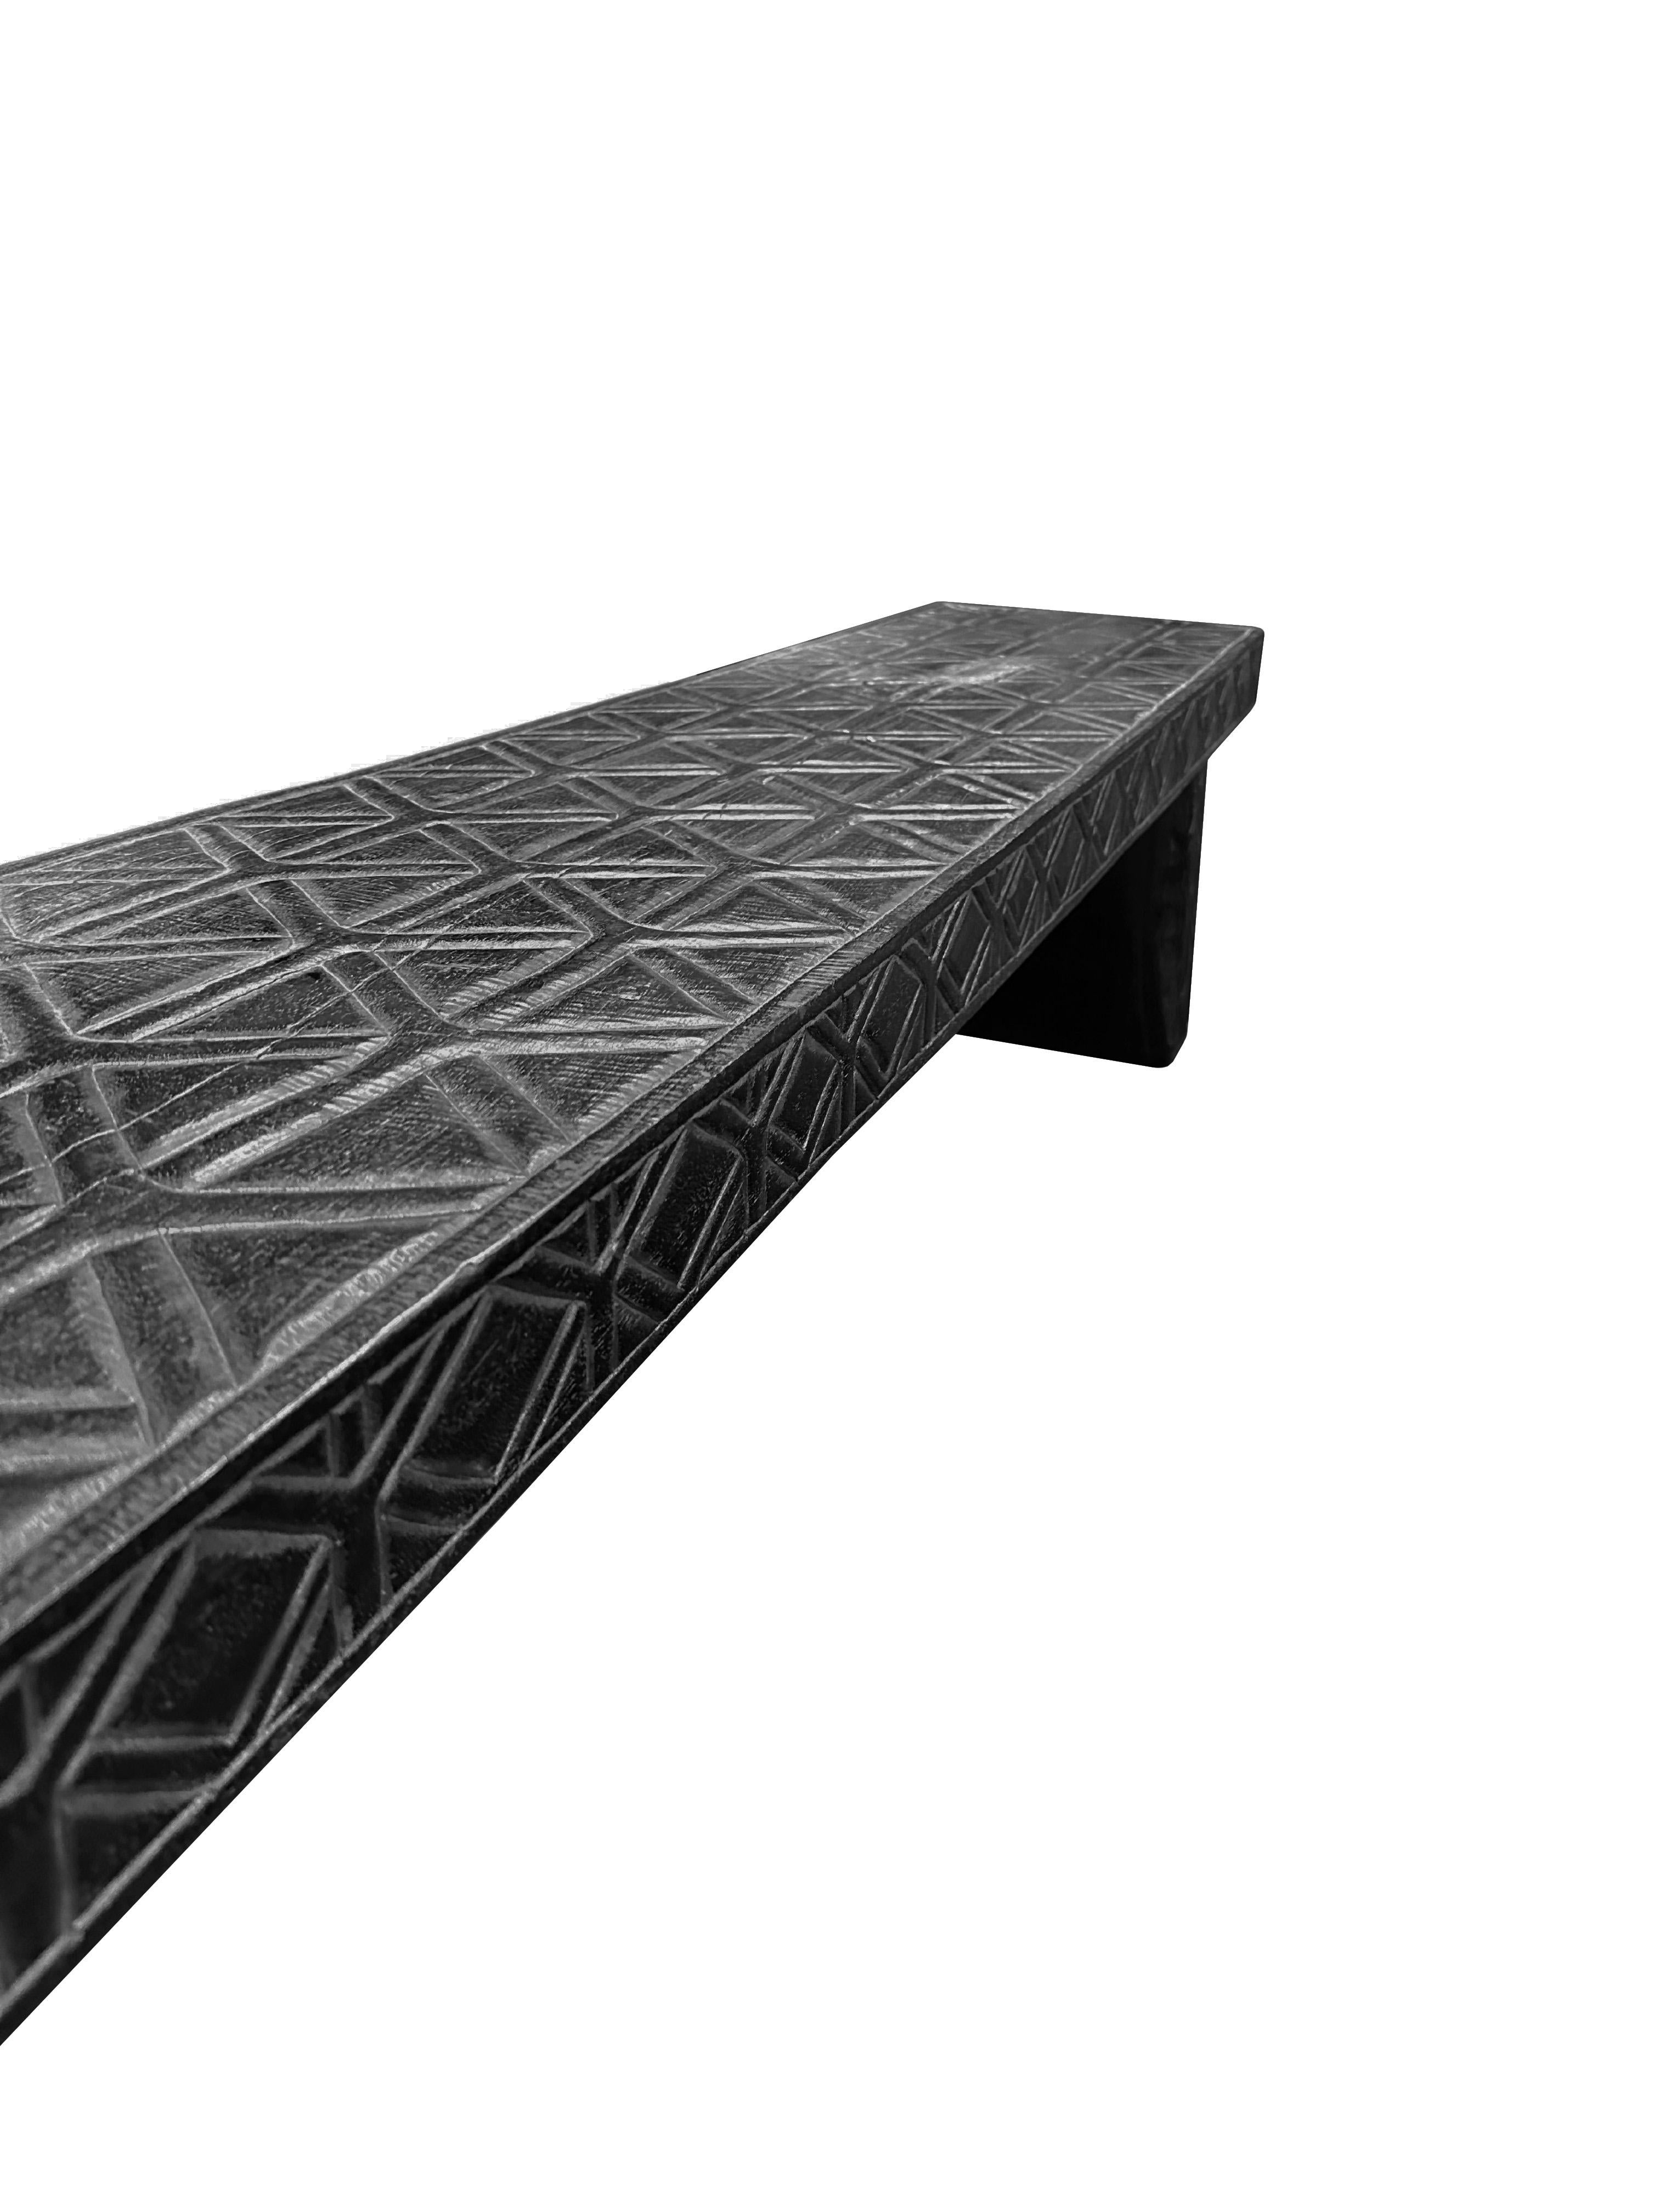 A sculptural hand-carved mango wood bench. To achieve is rich black pigment the bench was burnt three times and then finished with a clear coat. Unique to this bench is the hand carved detailing present on all sides. This carved dealing is meant to